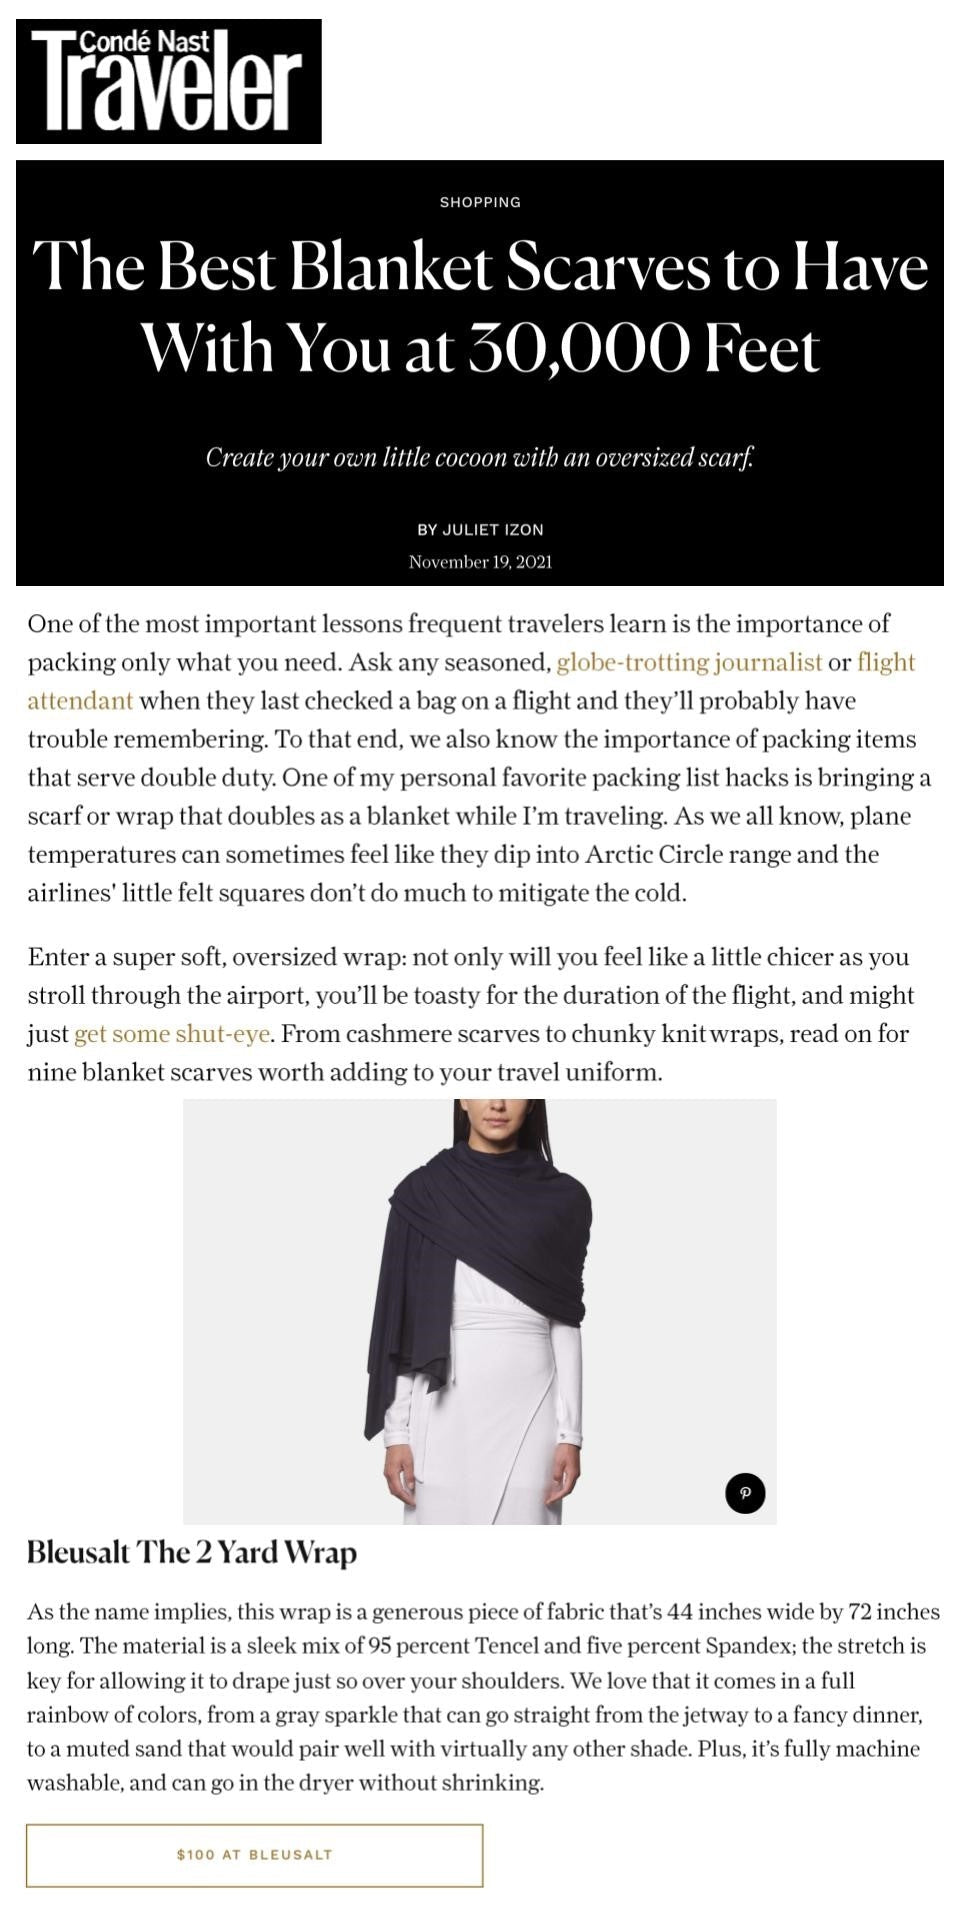 The Best Blanket Scarves to Have with you at 30,000 Feet-Bleusalt